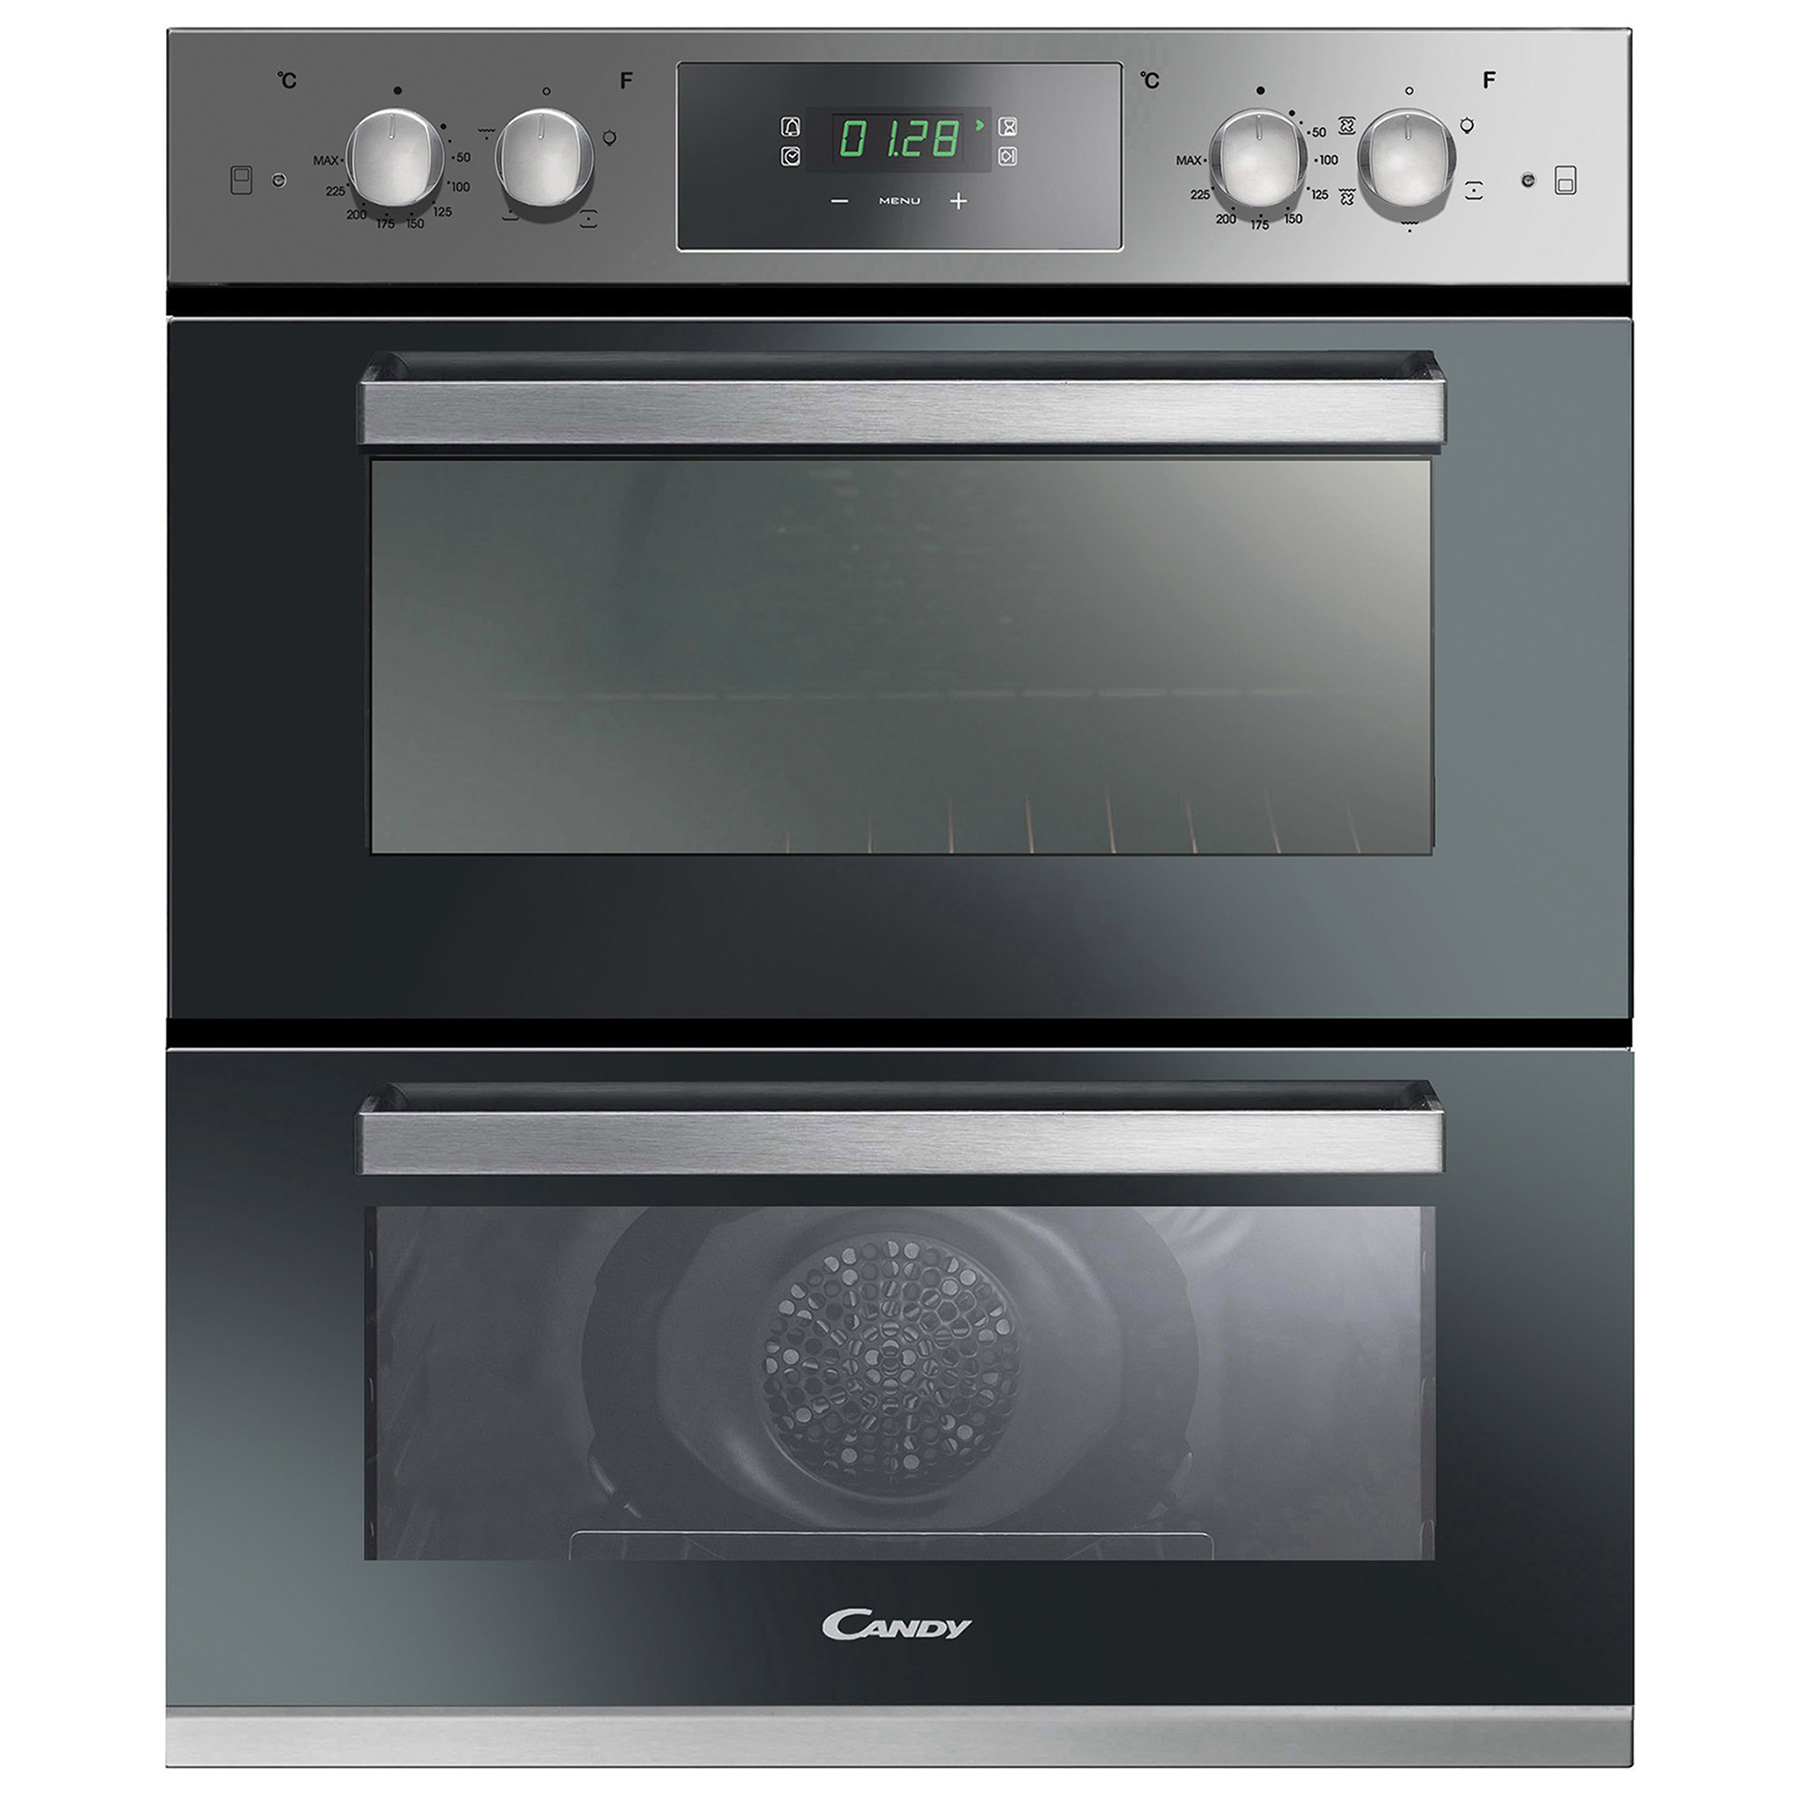 Candy FC7D405IN Built Under Electric Double Oven in St Steel A A Rated